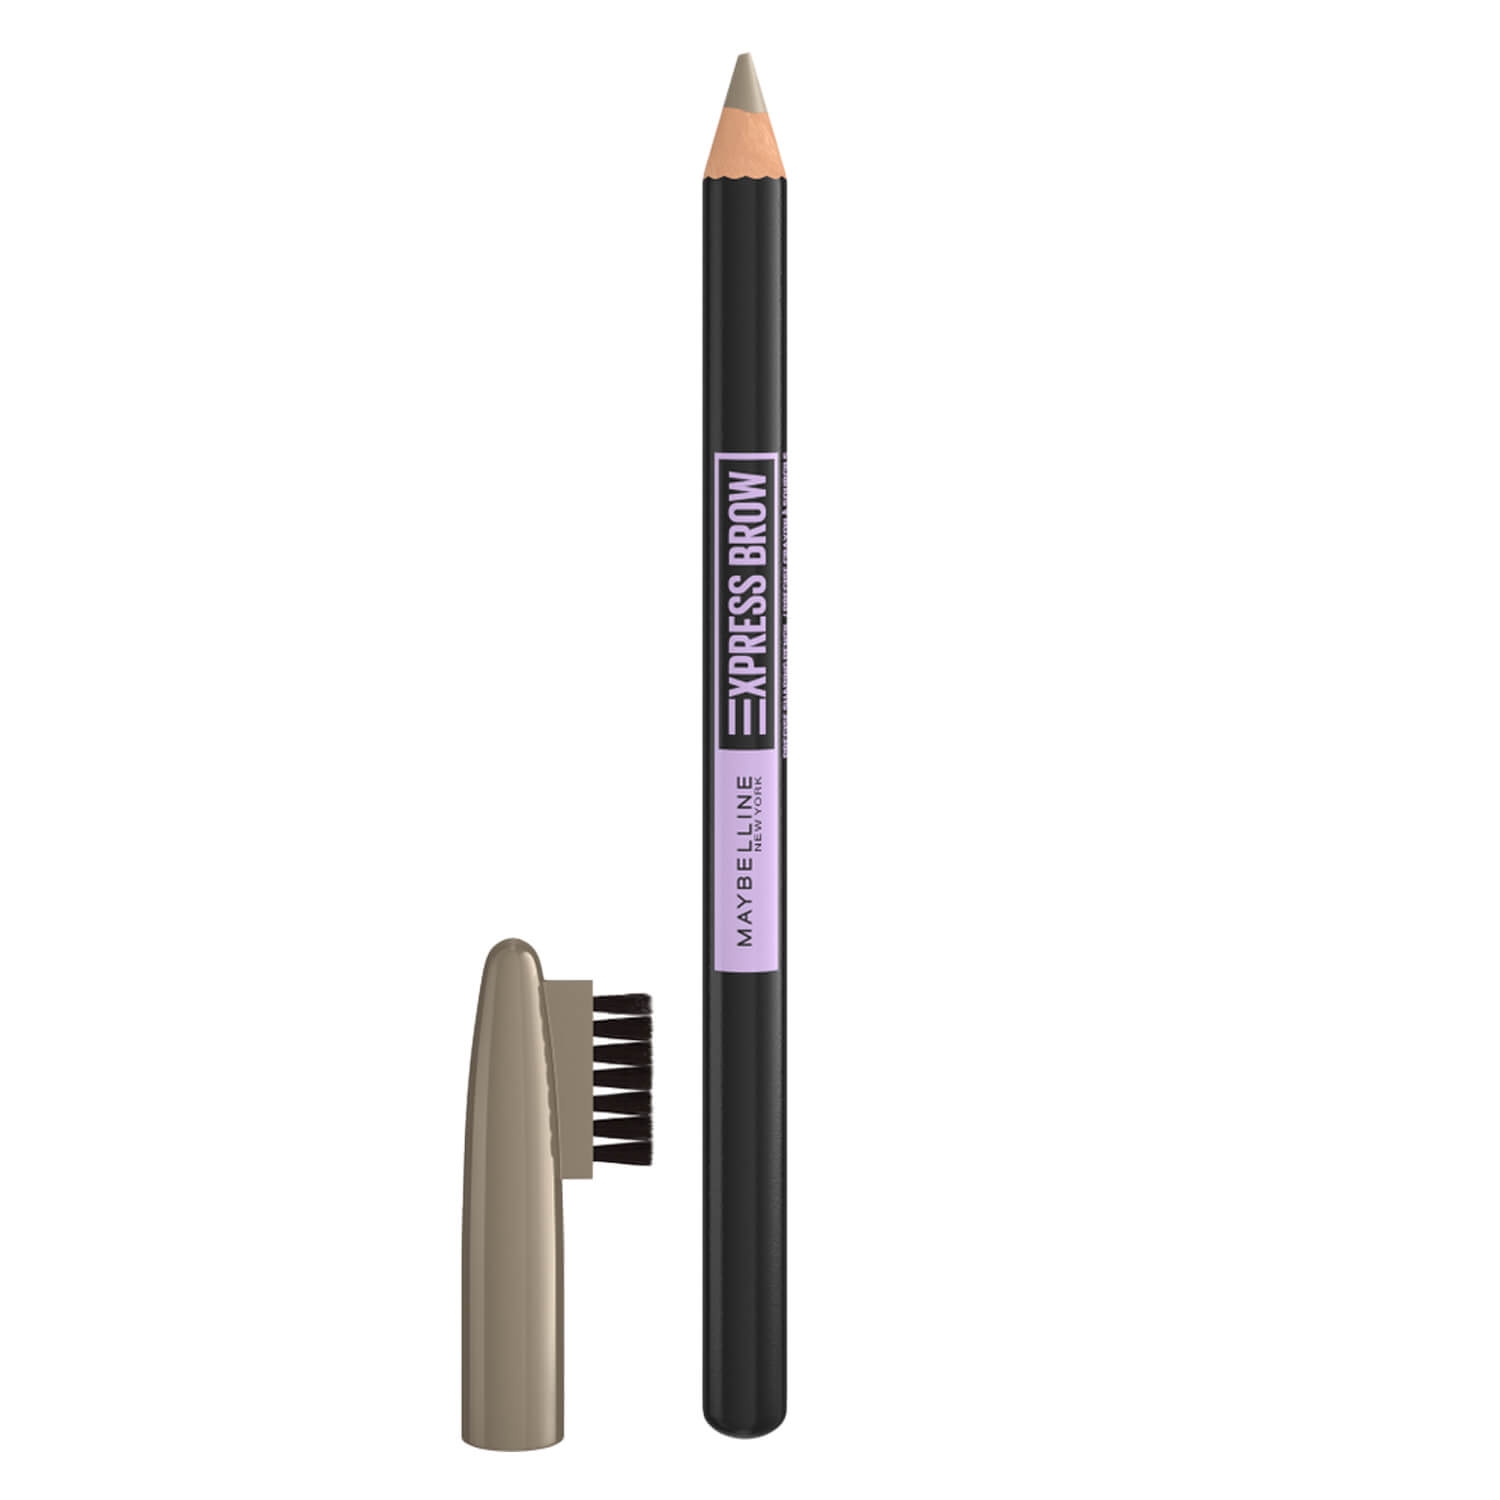 Produktbild von Maybelline NY Brows - Express Brow Precise Shaping 02 Blonde